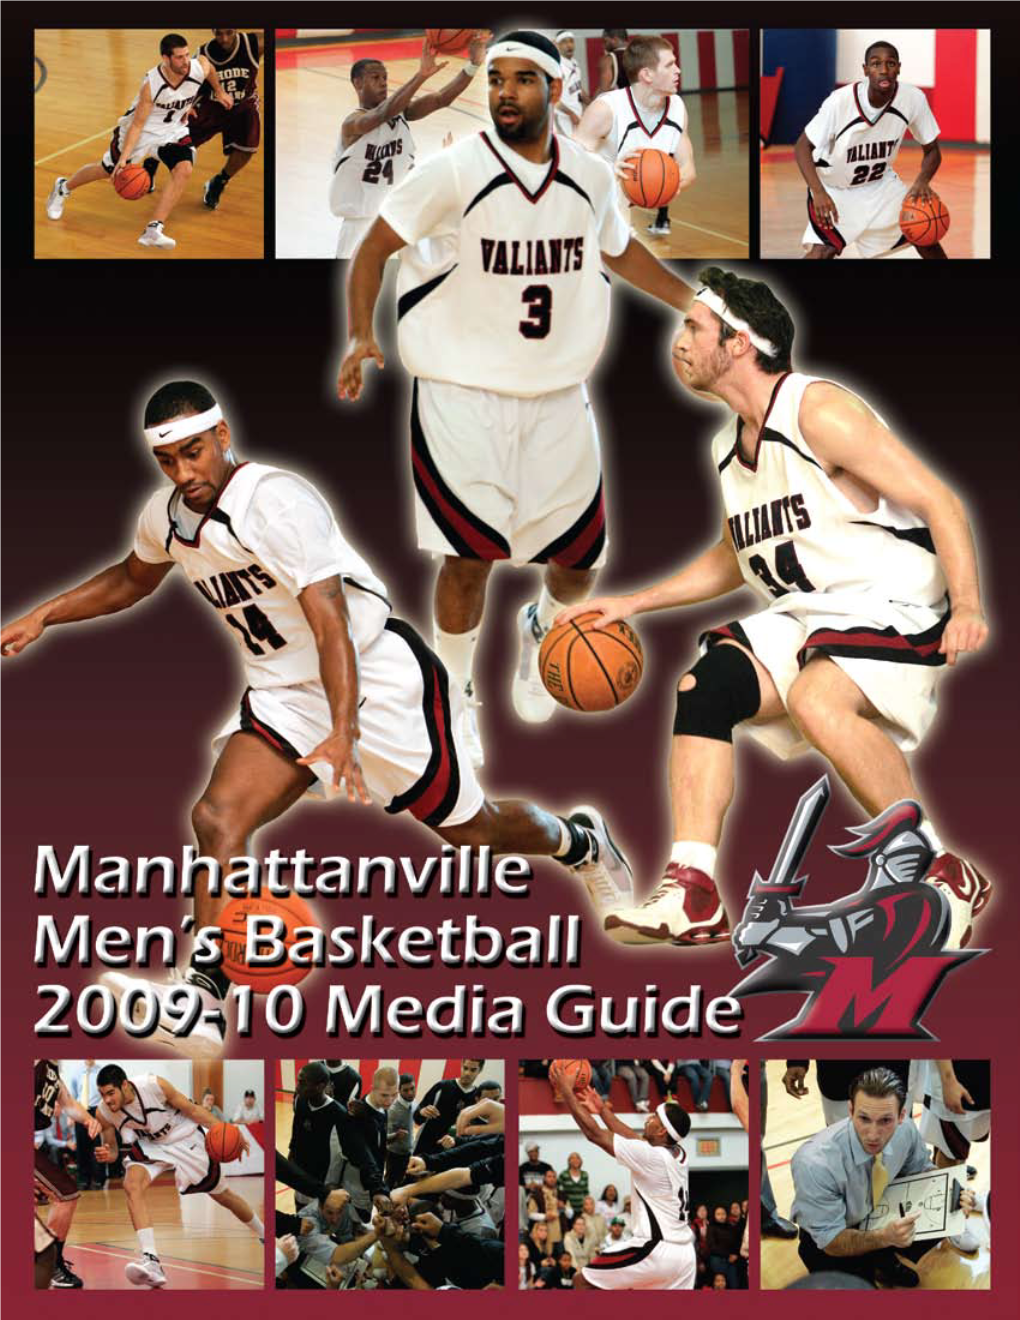 2009-10 Manhattanville Men’S Basketball Media Guide Quick Facts and Contents Table of Contents on the Cover Quick Facts Quick Facts & Contents